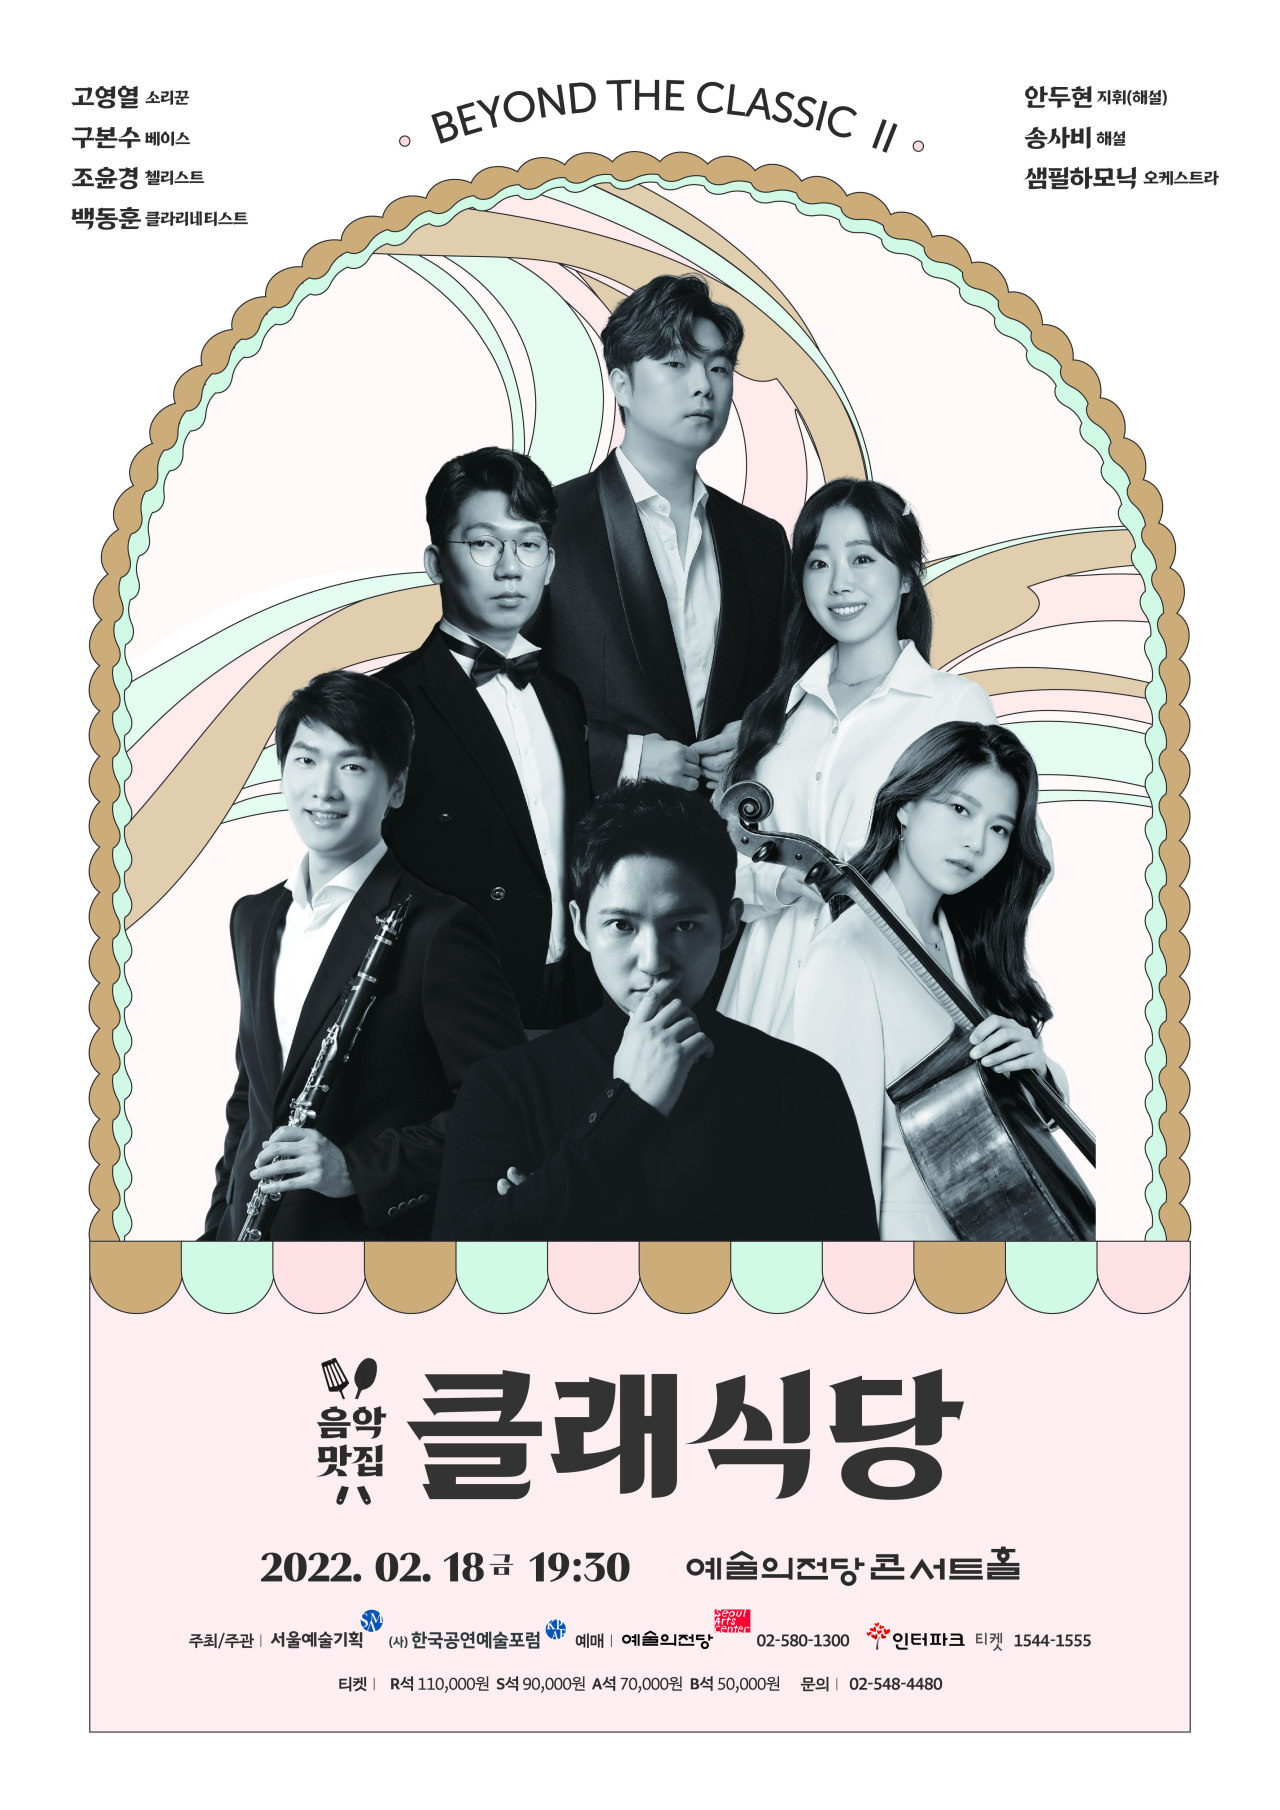 Poster of “Beyond the Classic 2” (Seoul Arts Management)